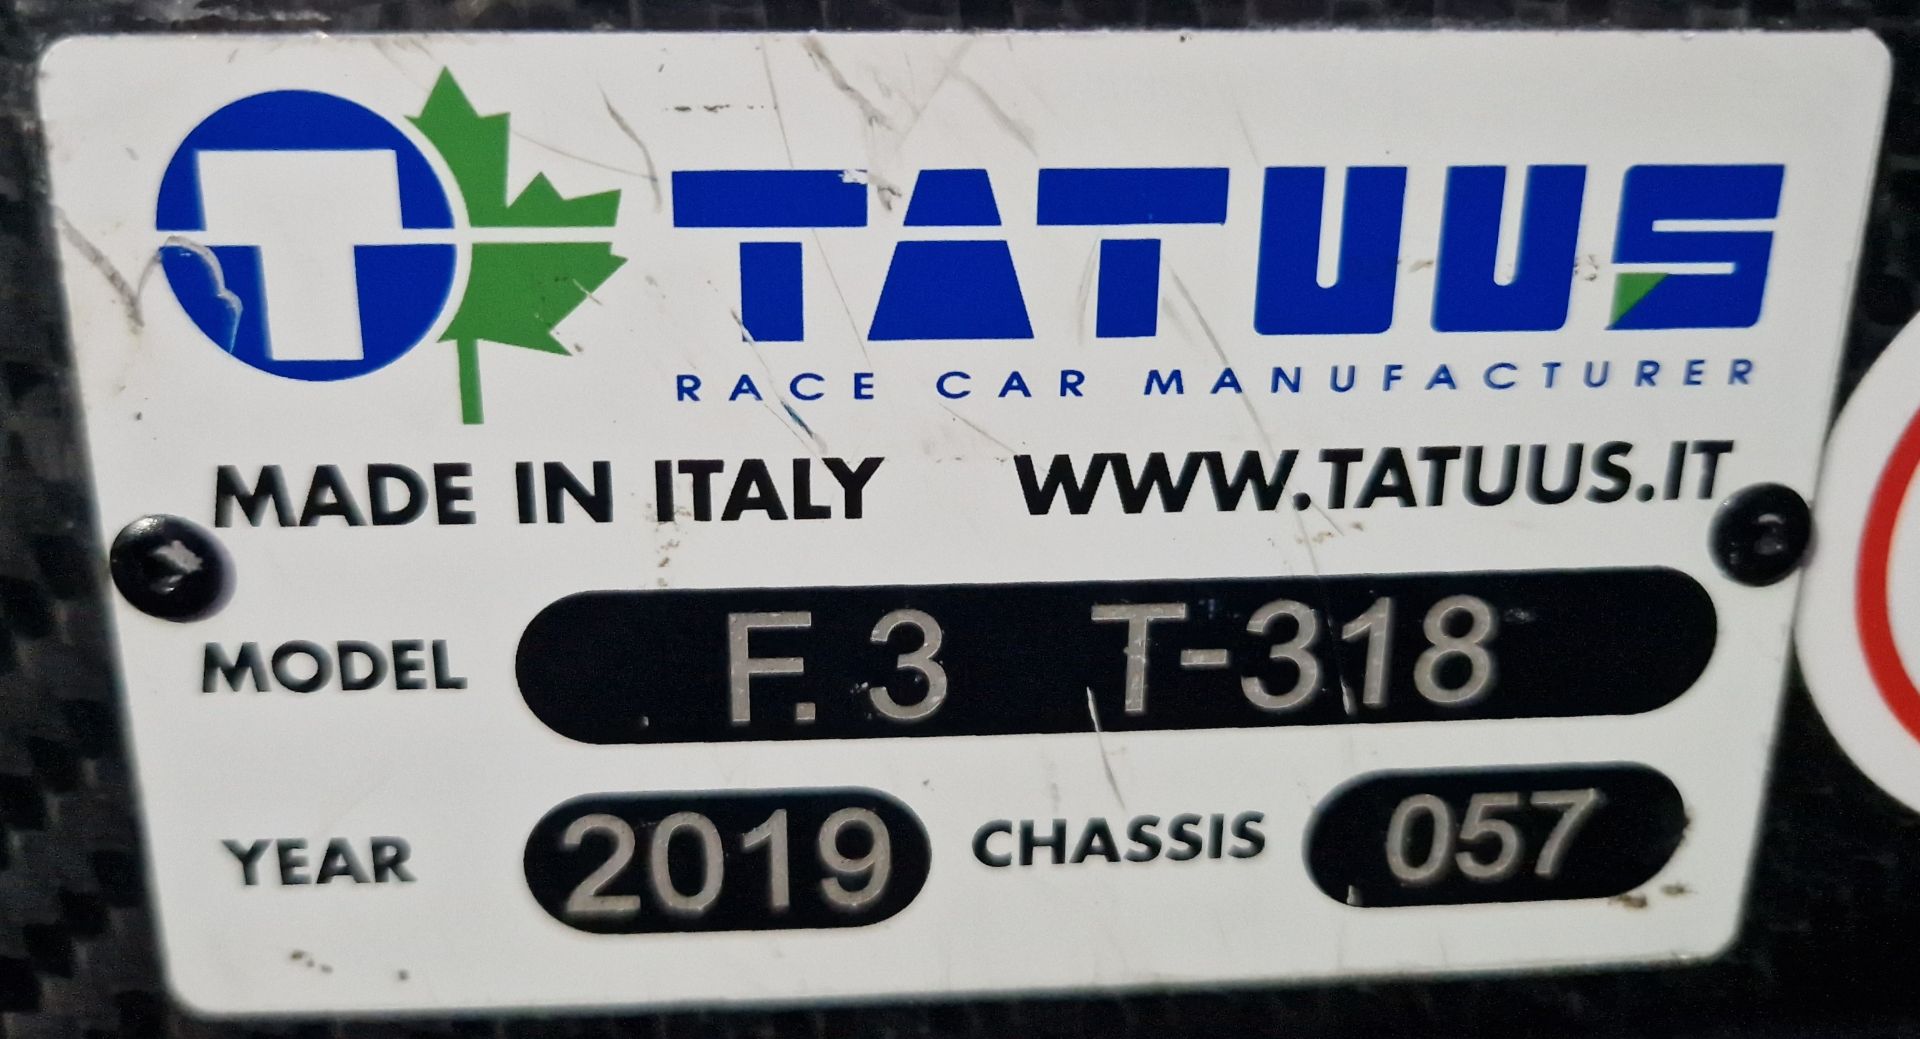 One TATUUS F3 T-318 Alfa Romeo Race Car Chassis No. 057 (2019) Finished in the W Series Academy - Bild 6 aus 10